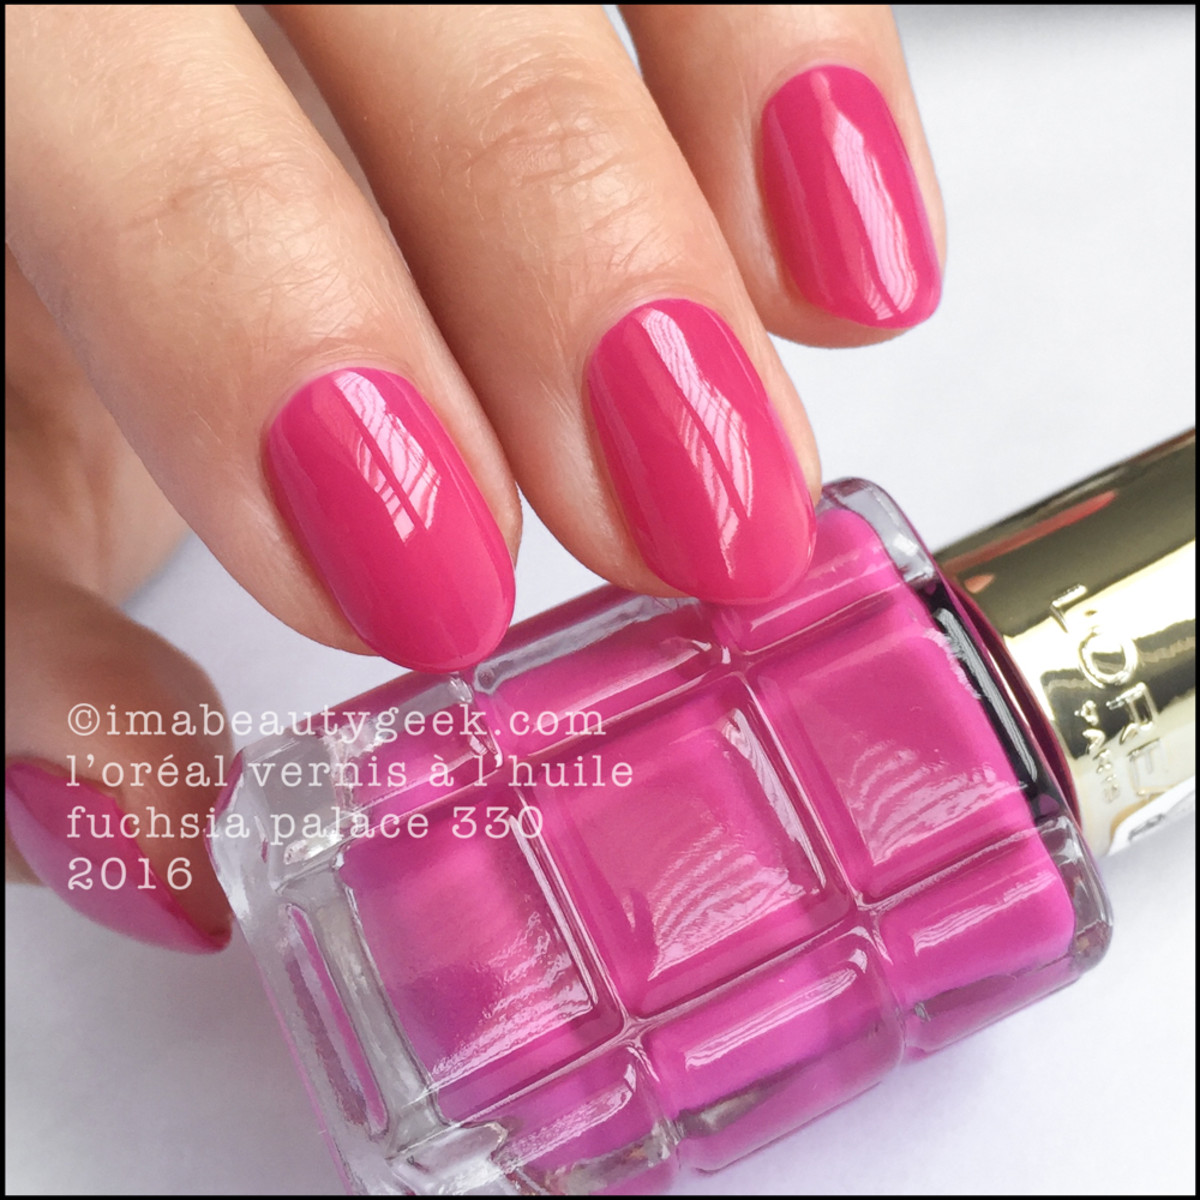 L'OREAL VERNIS A L'HUILE SWATCHES & REVIEW - Beautygeeks